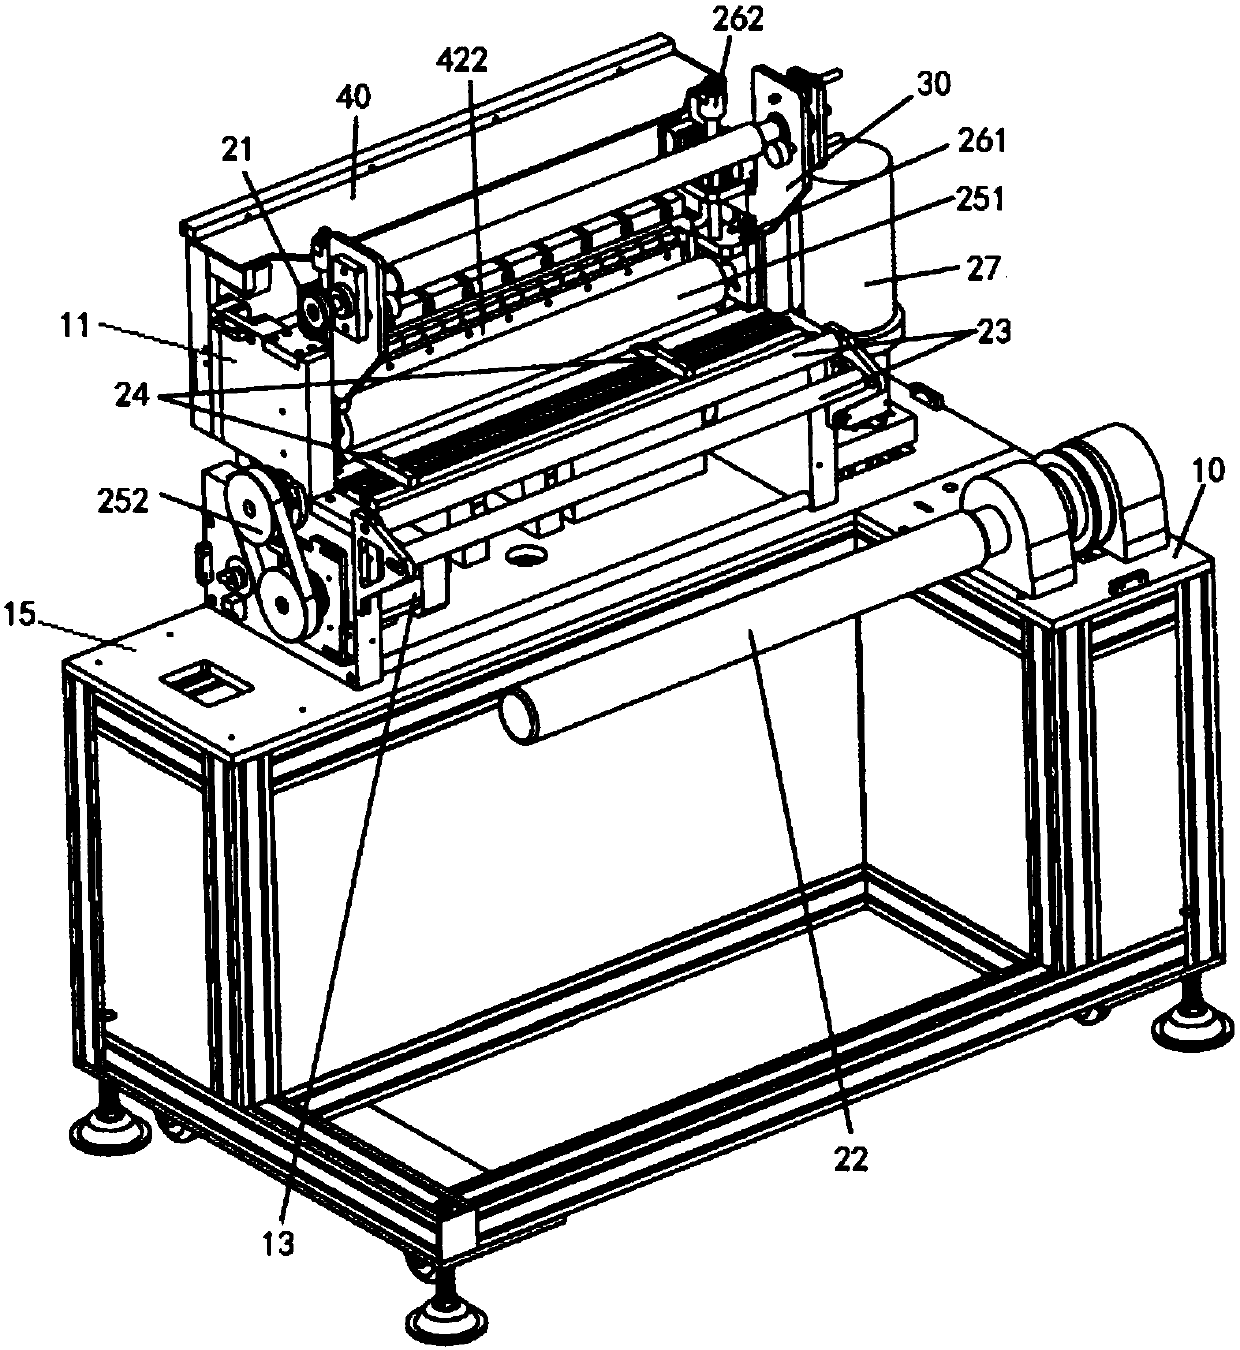 An automatic embossing device